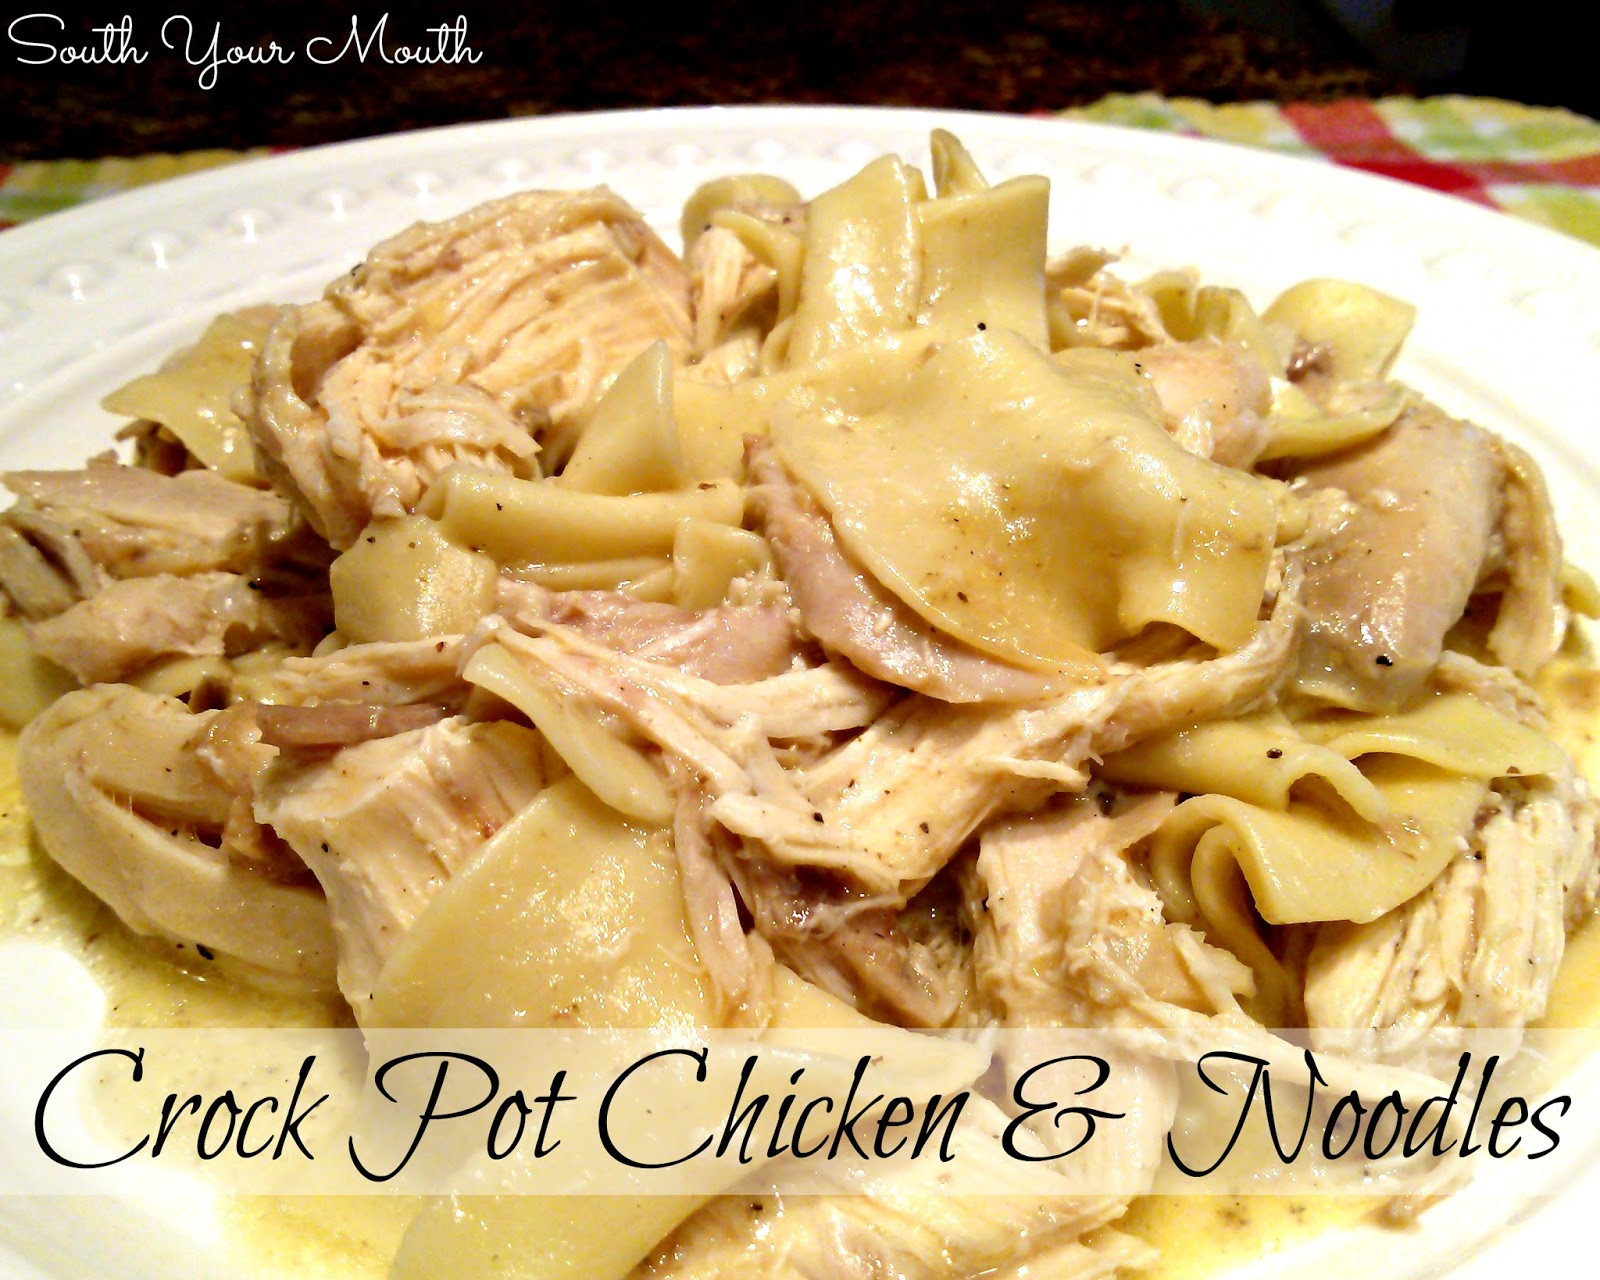 Crock Pot Chicken And Noodles
 South Your Mouth Crock Pot Chicken and Noodles